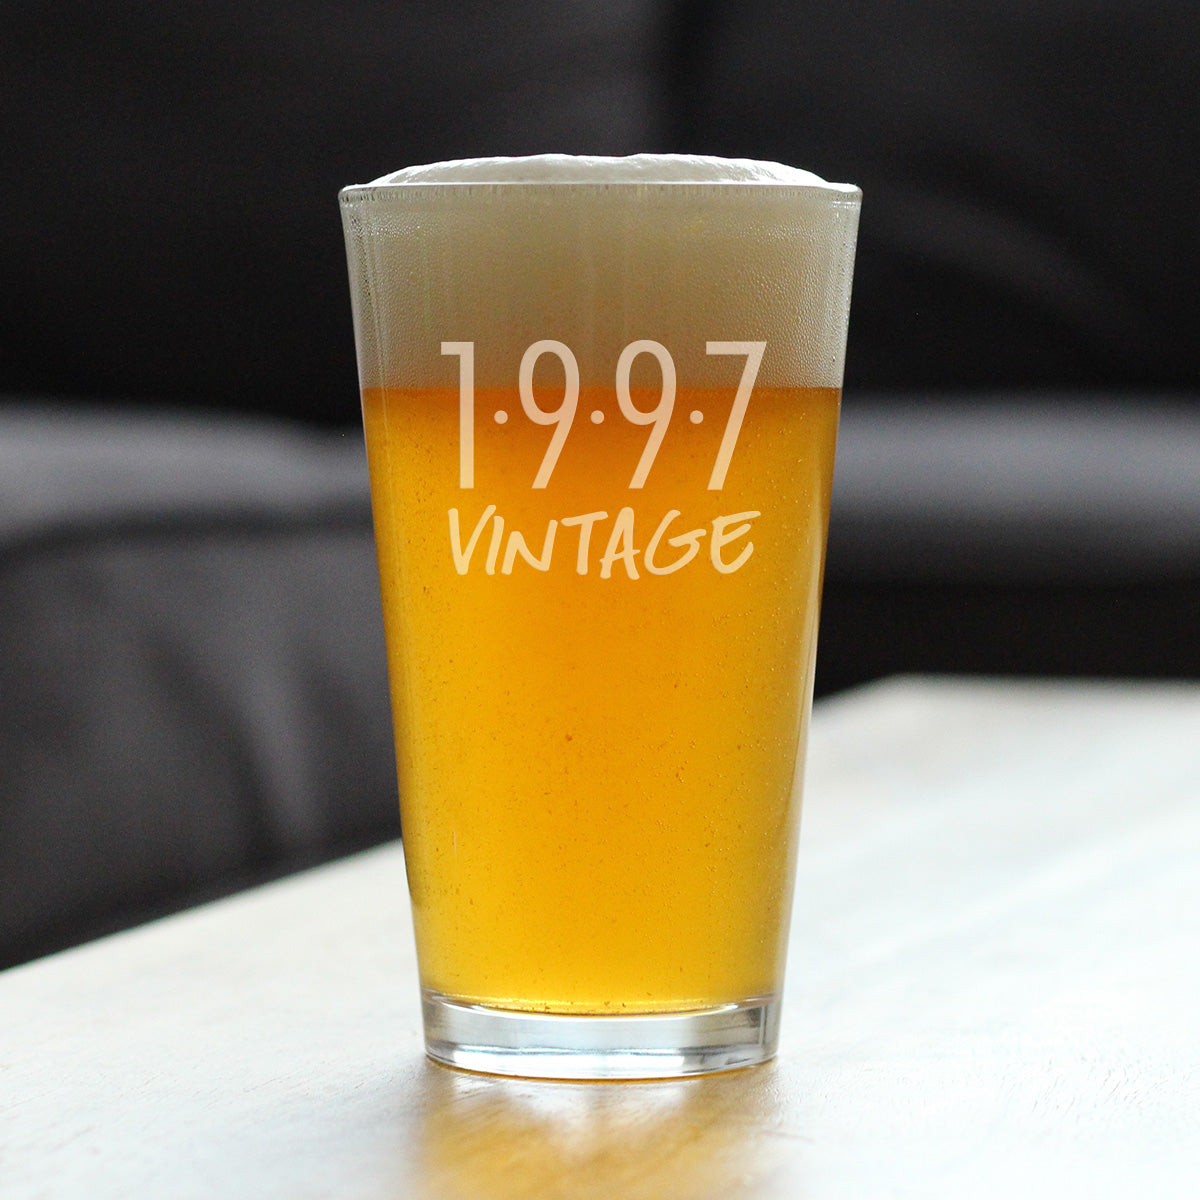 Vintage 1997 - Pint Glass for Beer - 27th Birthday Gifts for Men or Women Turning 27 - Fun Bday Party Decor - 16 oz